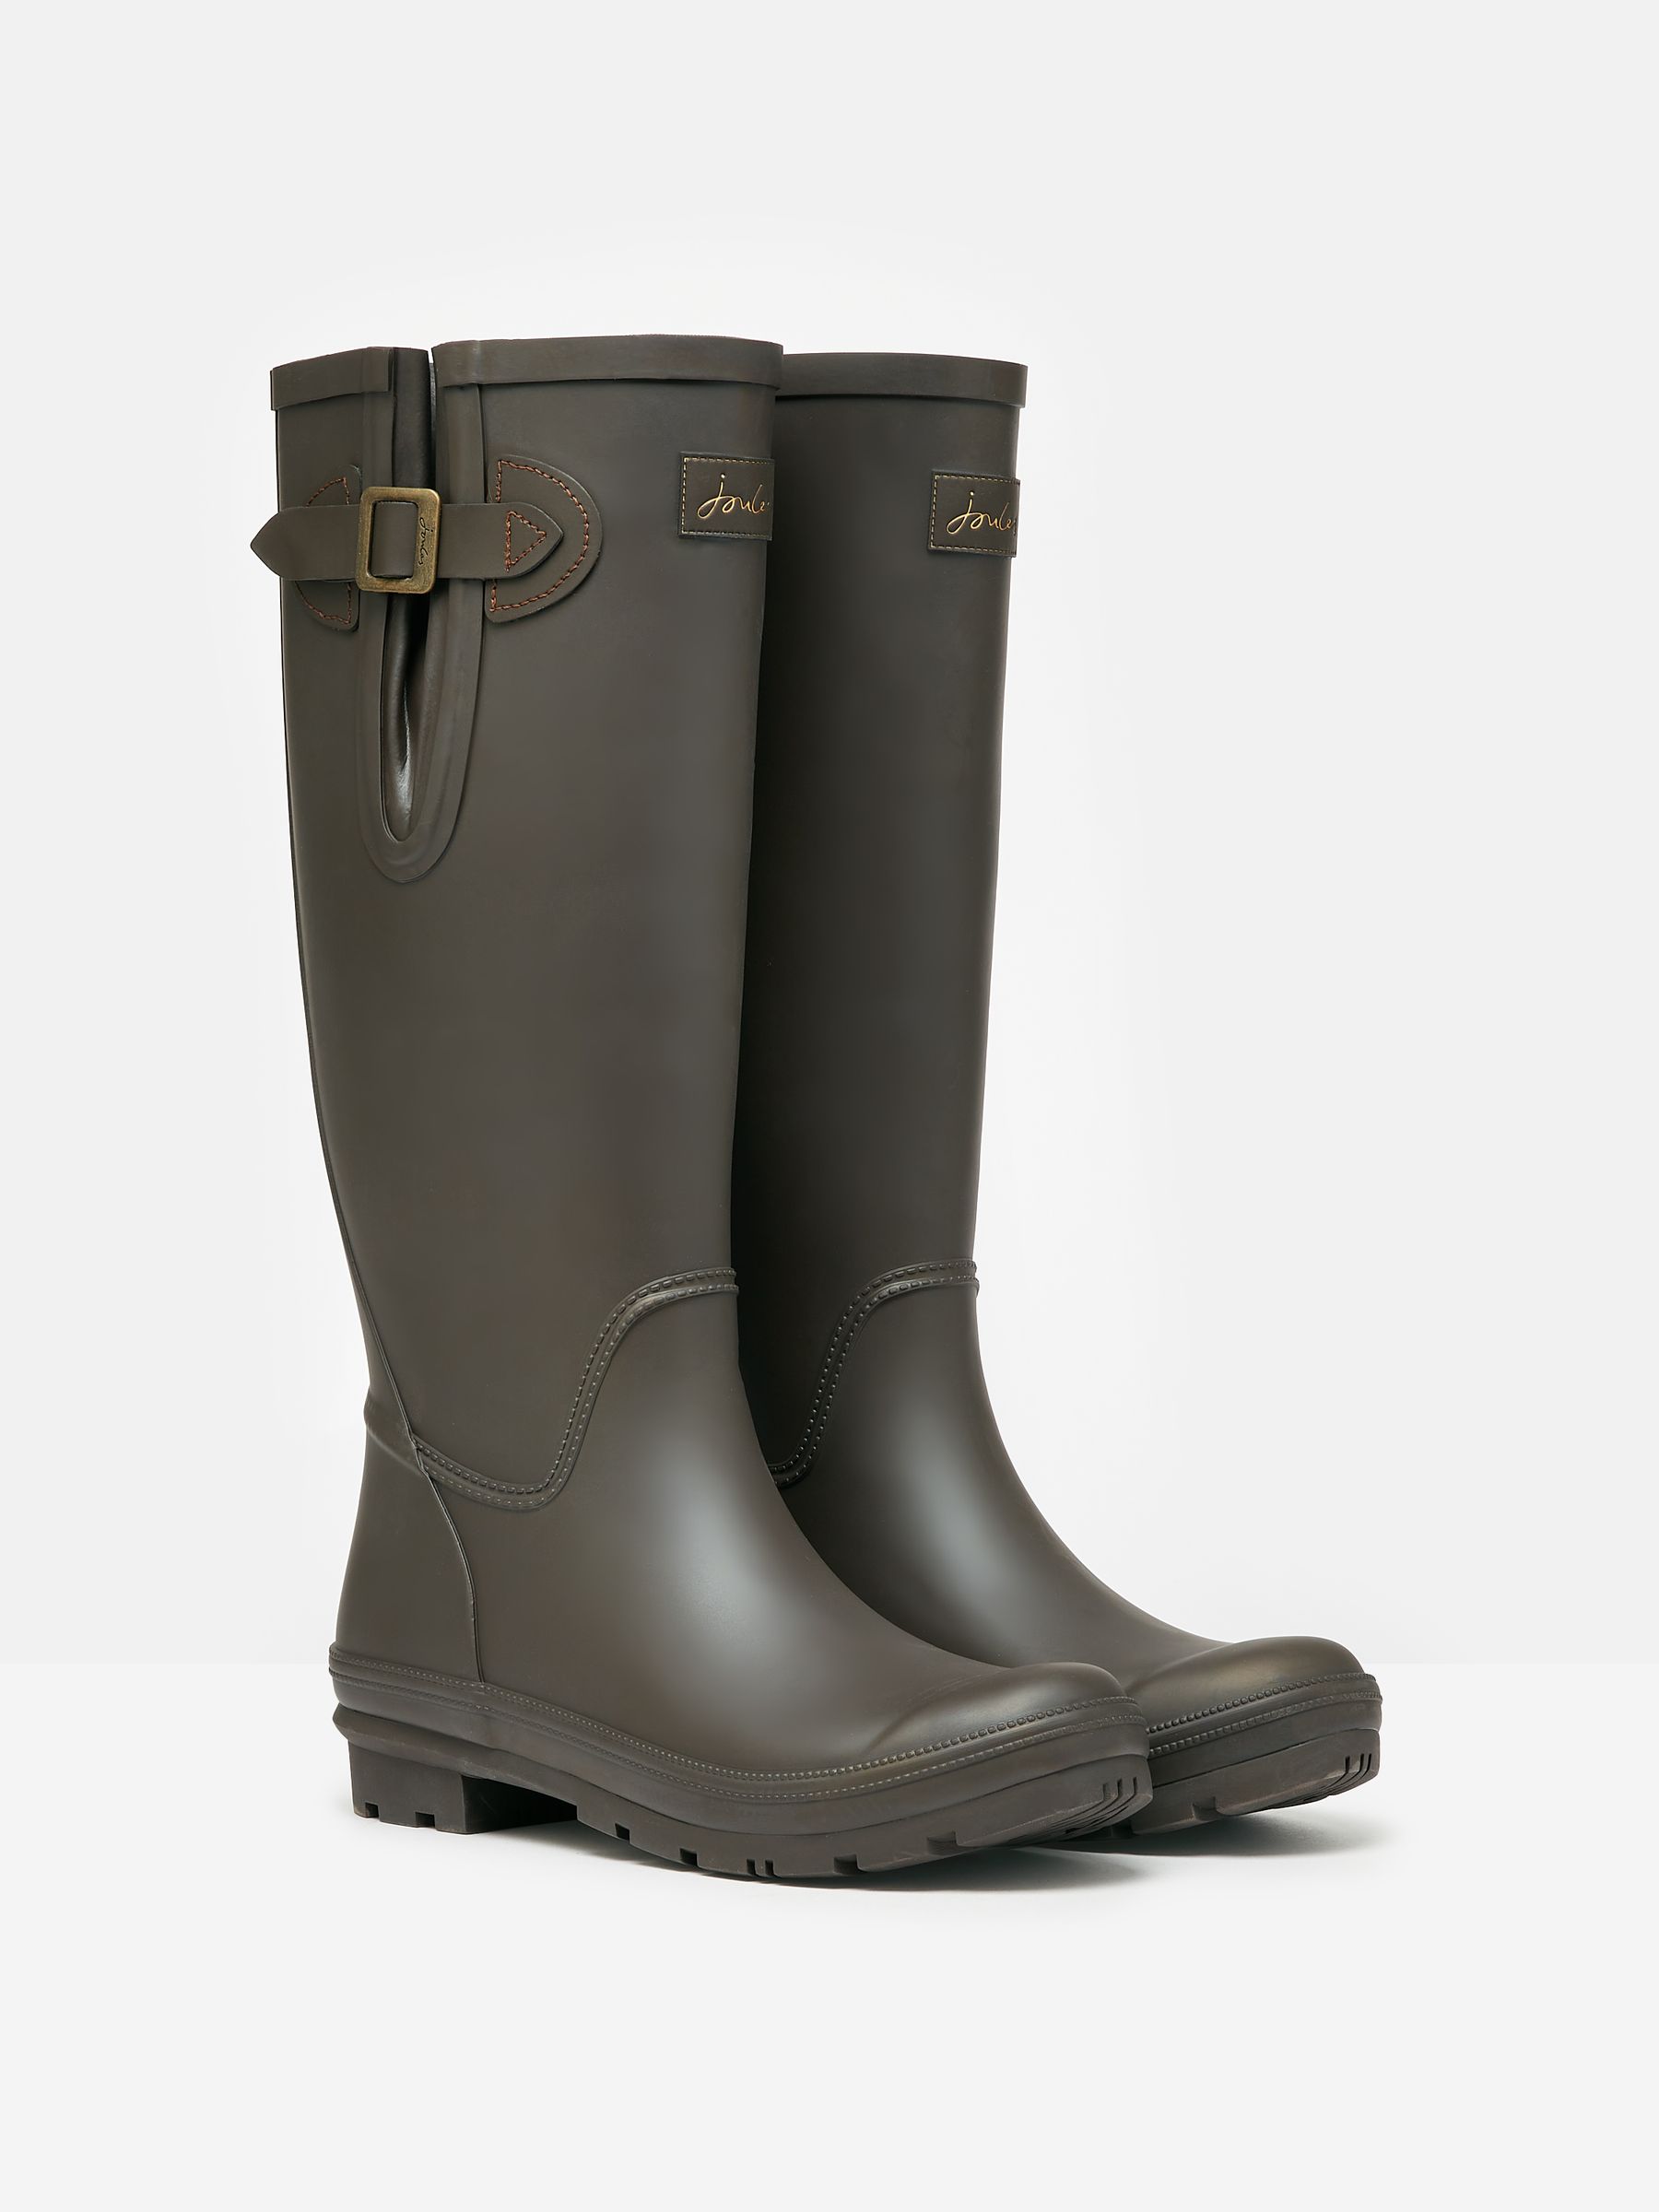 Buy Houghton Chocolate Brown Adjustable Tall Wellies from the Joules ...